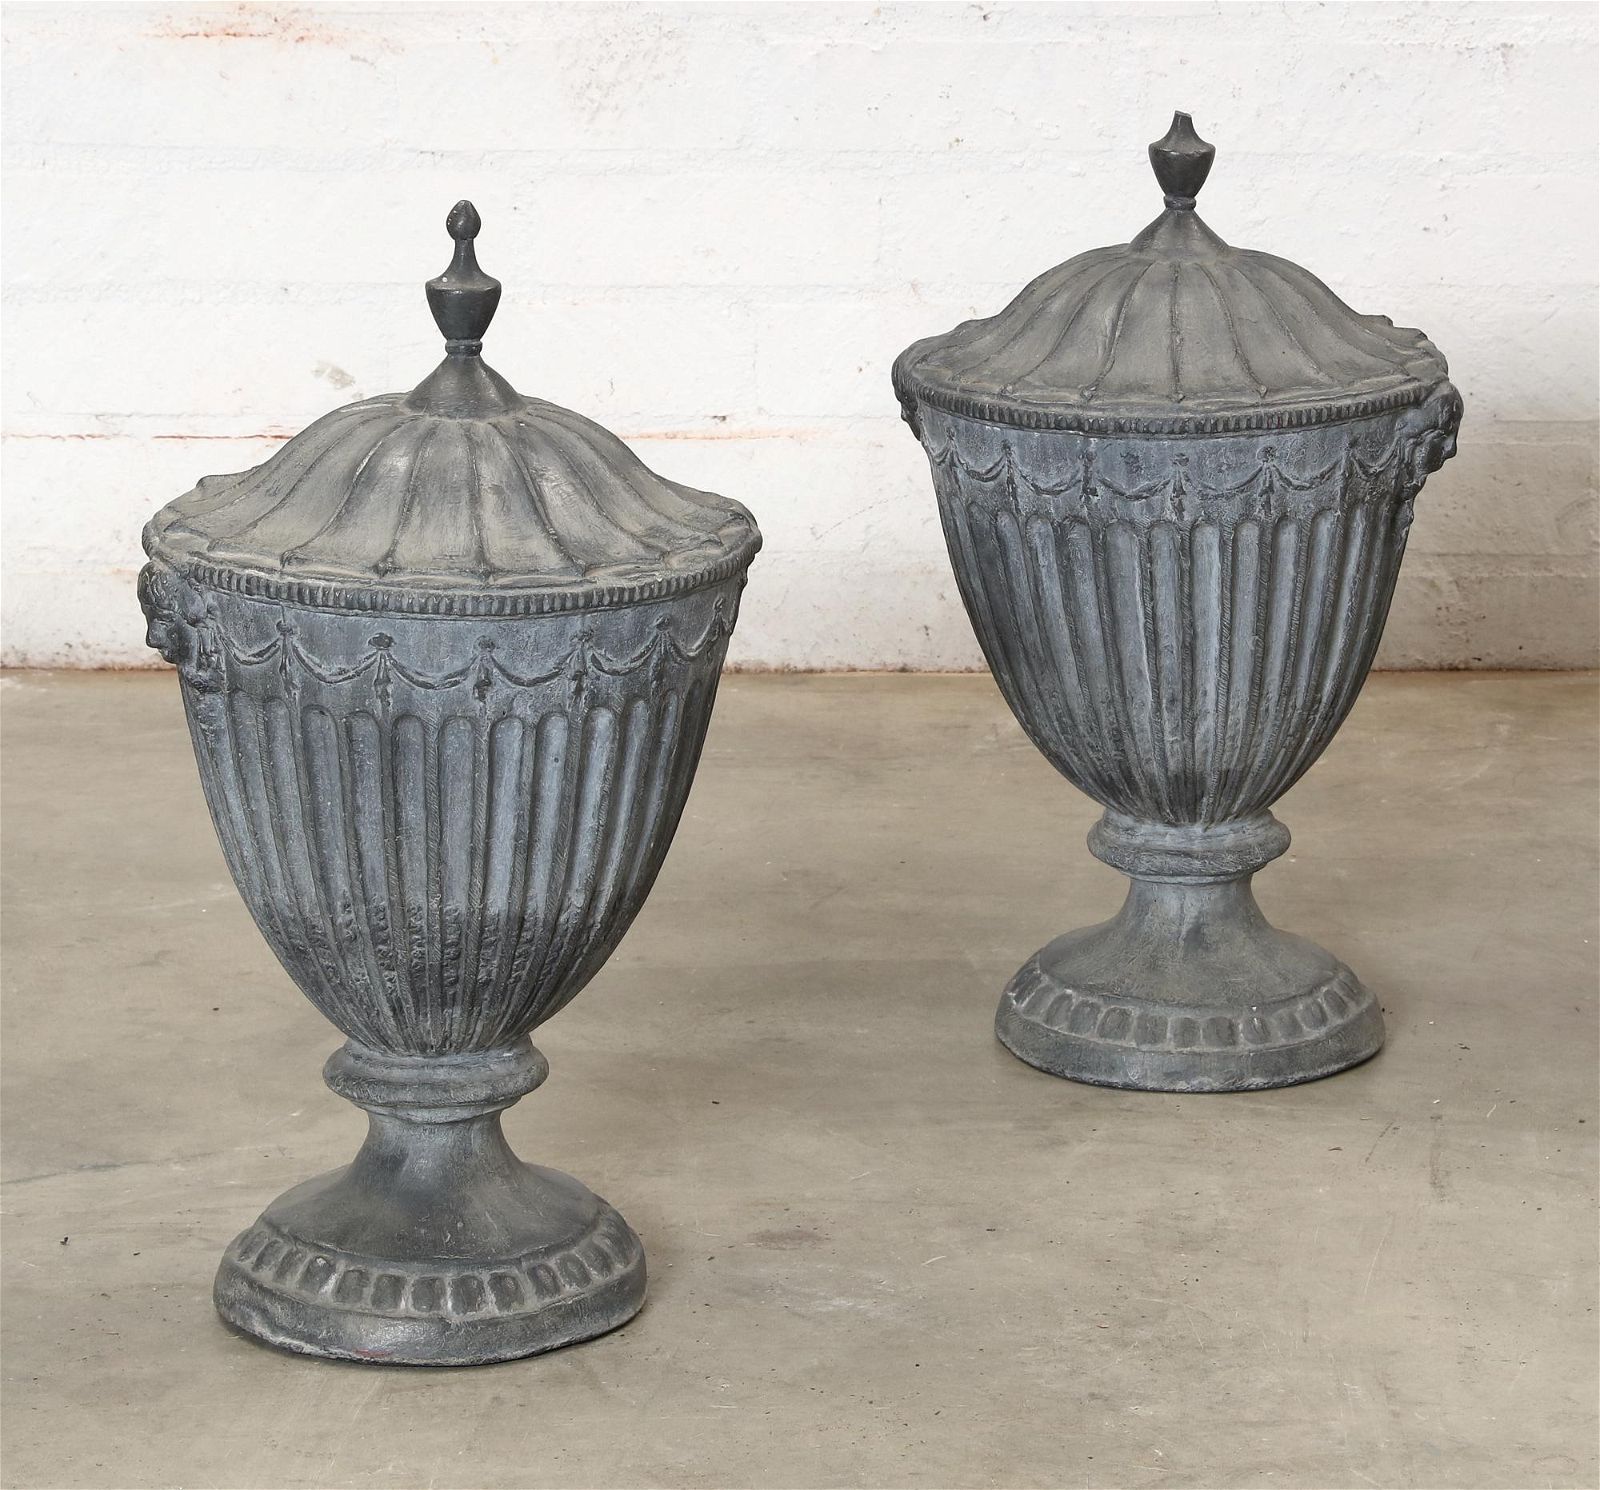 A PAIR OF NEOCLASSICAL STYLE LEAD